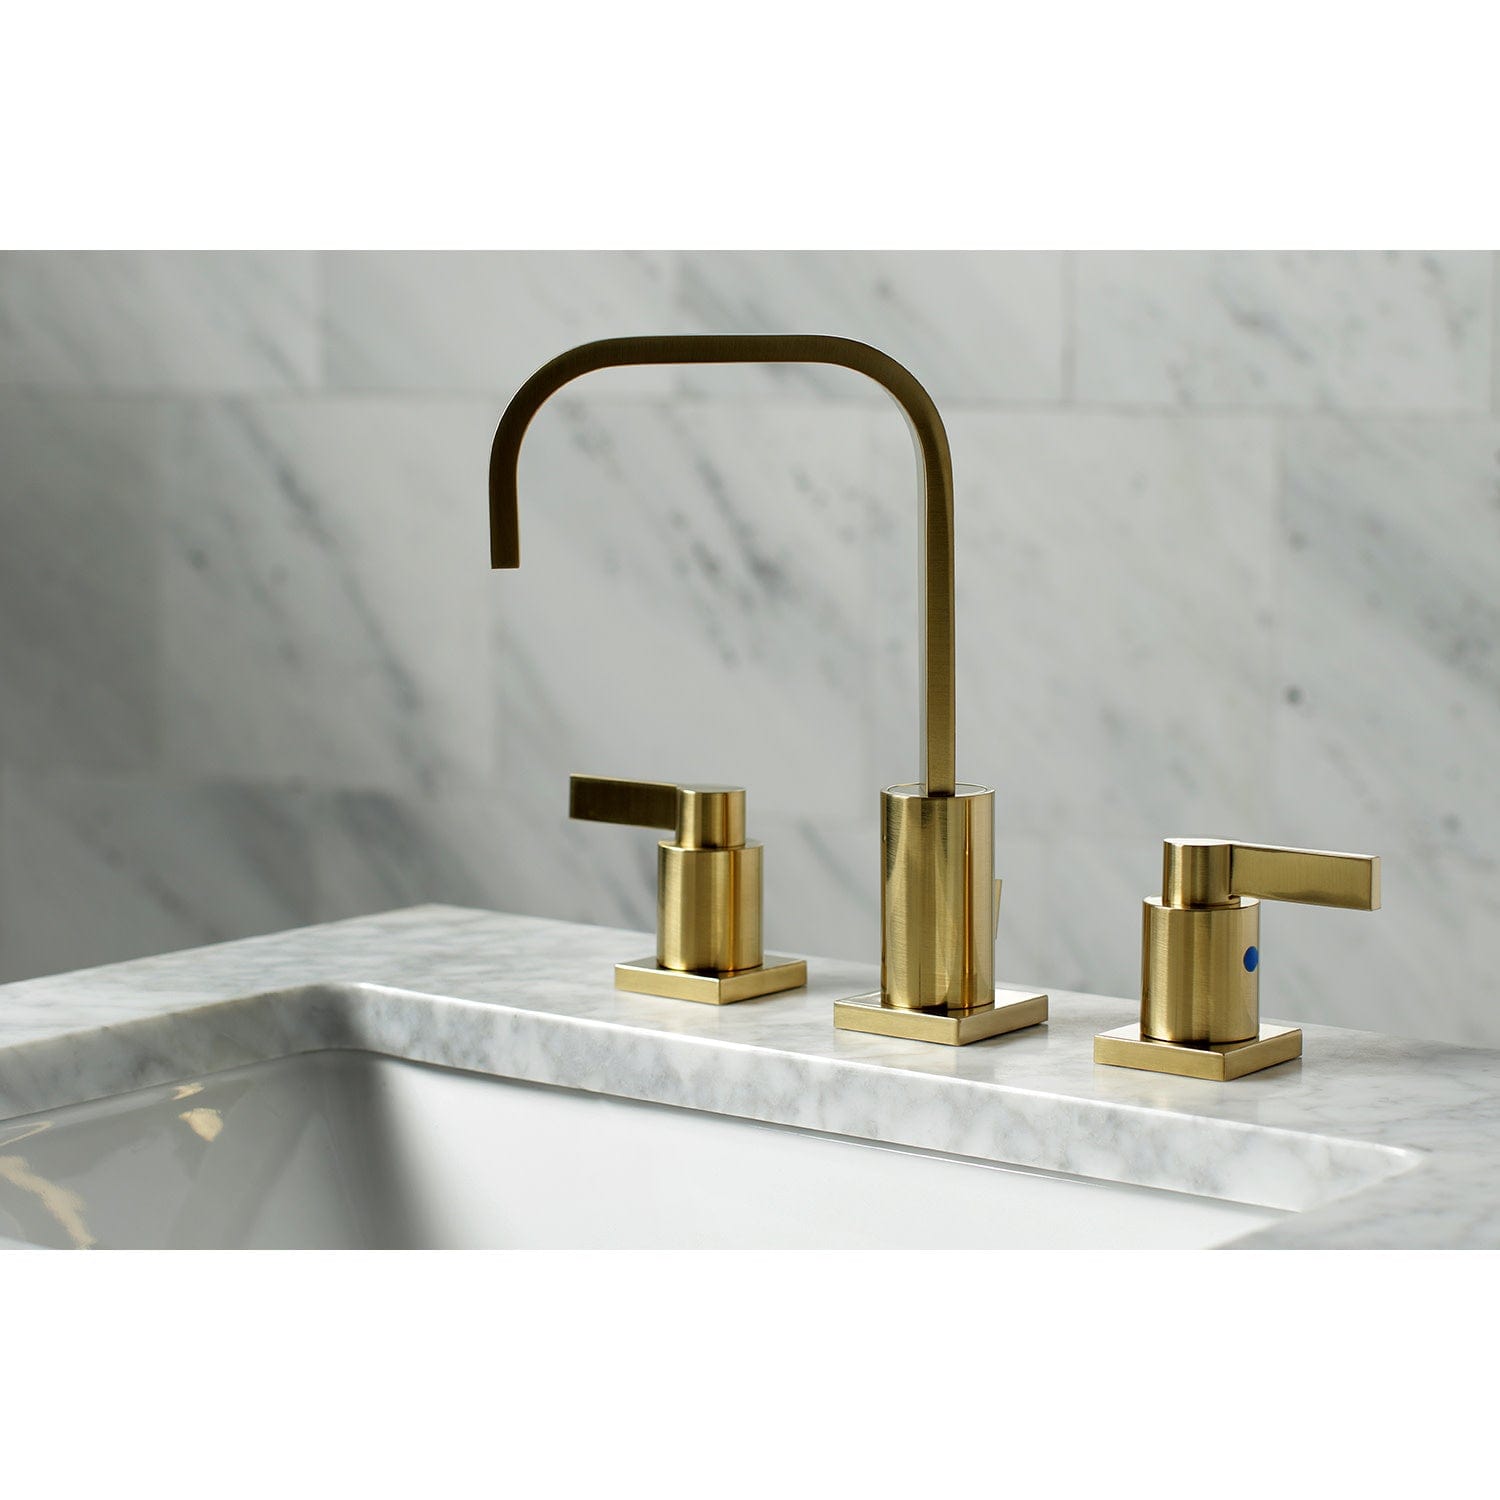 KINGSTON Brass Fauceture NuvoFusion Widespread Bathroom Faucet - Brushed Brass